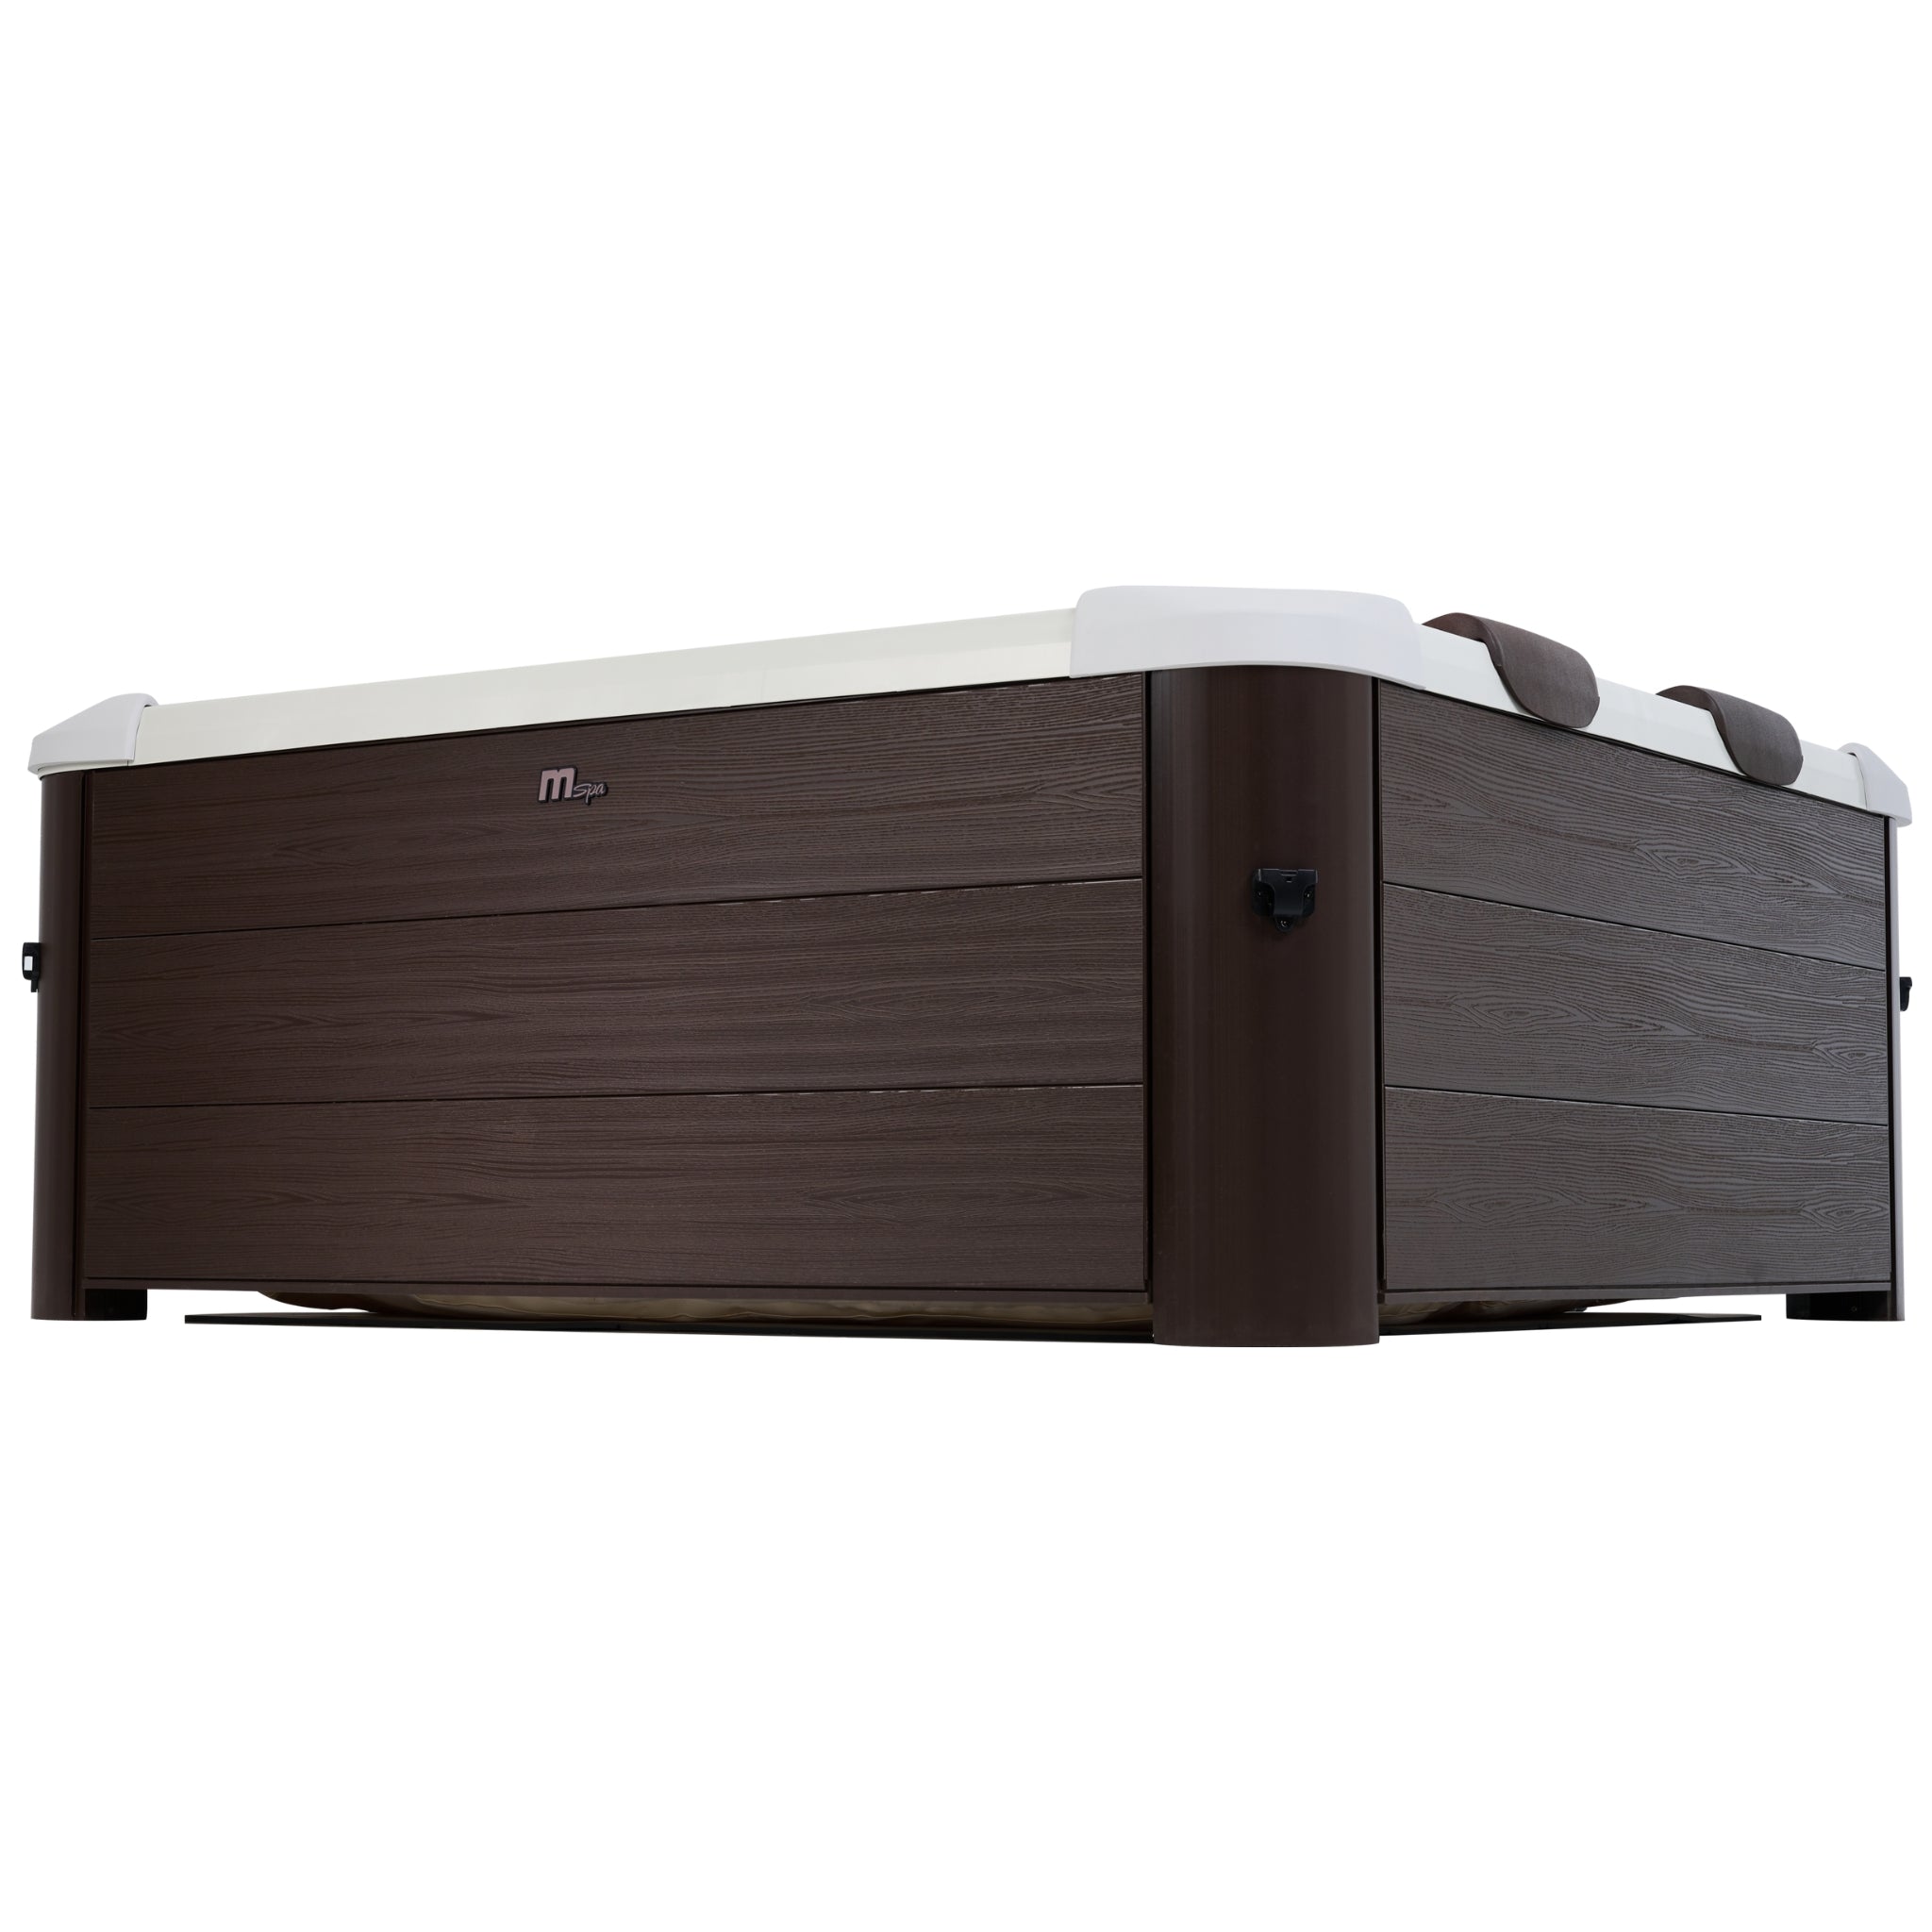 Urban Oasis: MSPA Tribeca Inflatable Hot Tub for 6